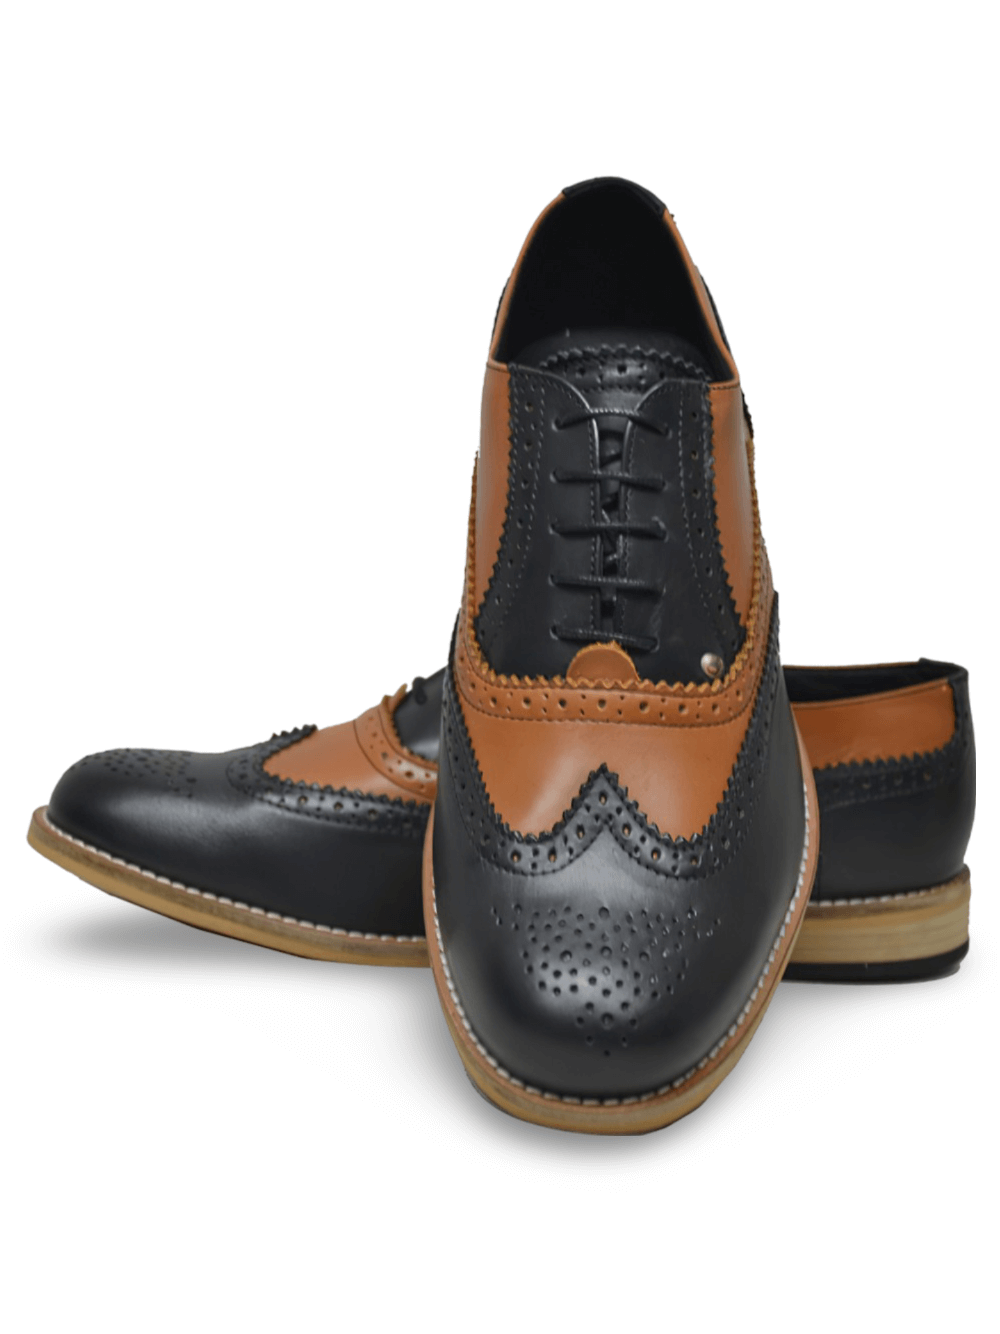 Chic Brown And Black Grained Leather Oxford Shoes for Men